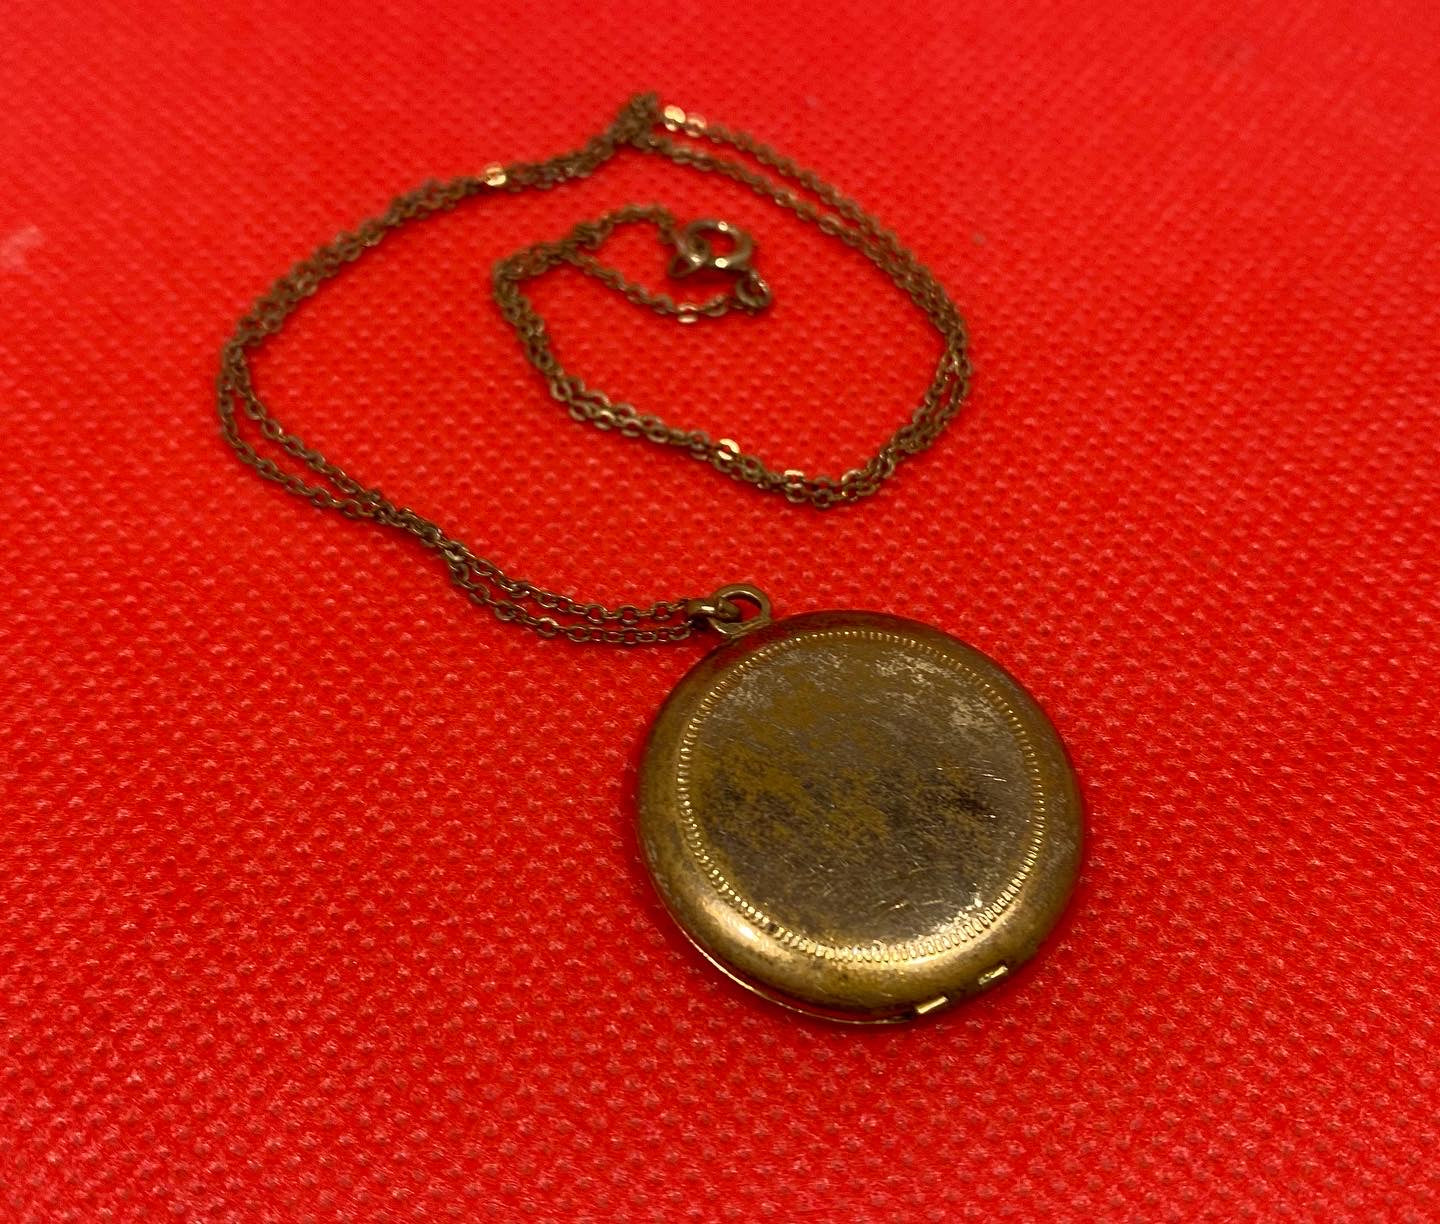 Antique Rolled Gold Victorian Locket Necklace.